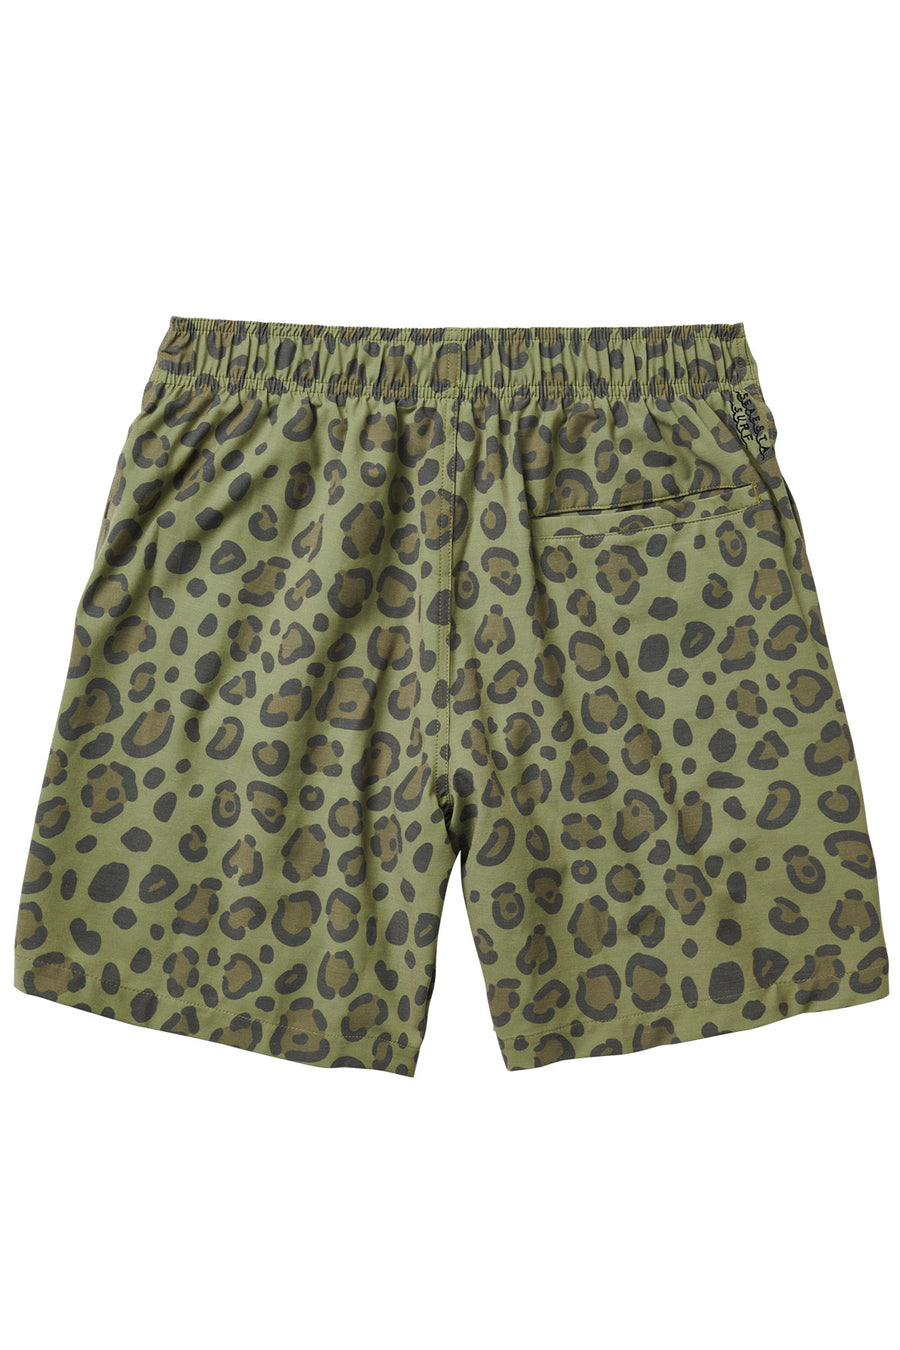 Men's Boardshorts / Calico Crab / Army / with LINER